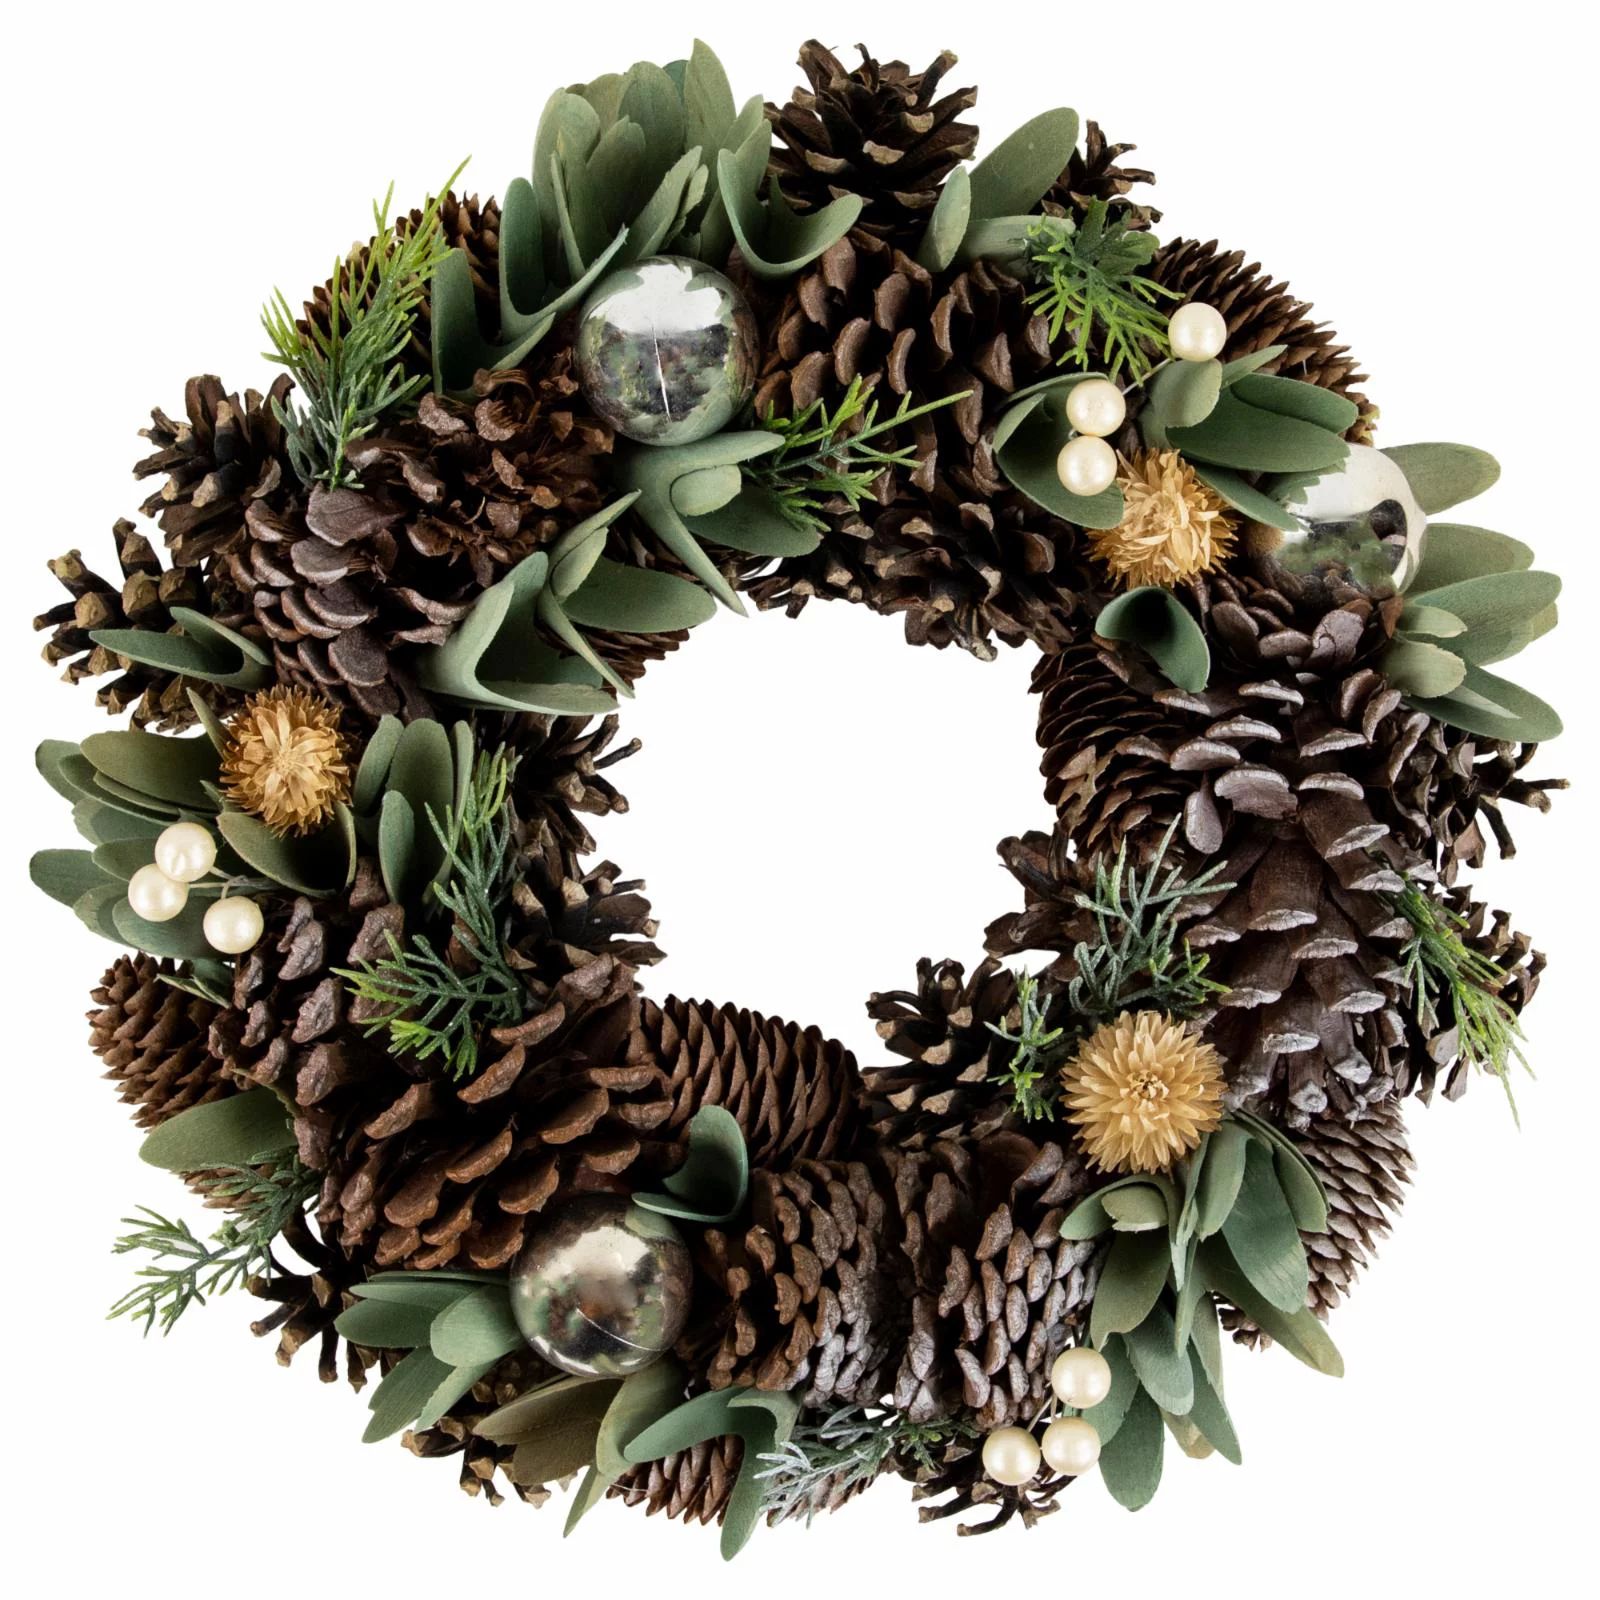 Northlight Silver and Green Mixed Foliage and Pinecone Christmas Wreath 13.5-Inch Unlit | Walmart (US)